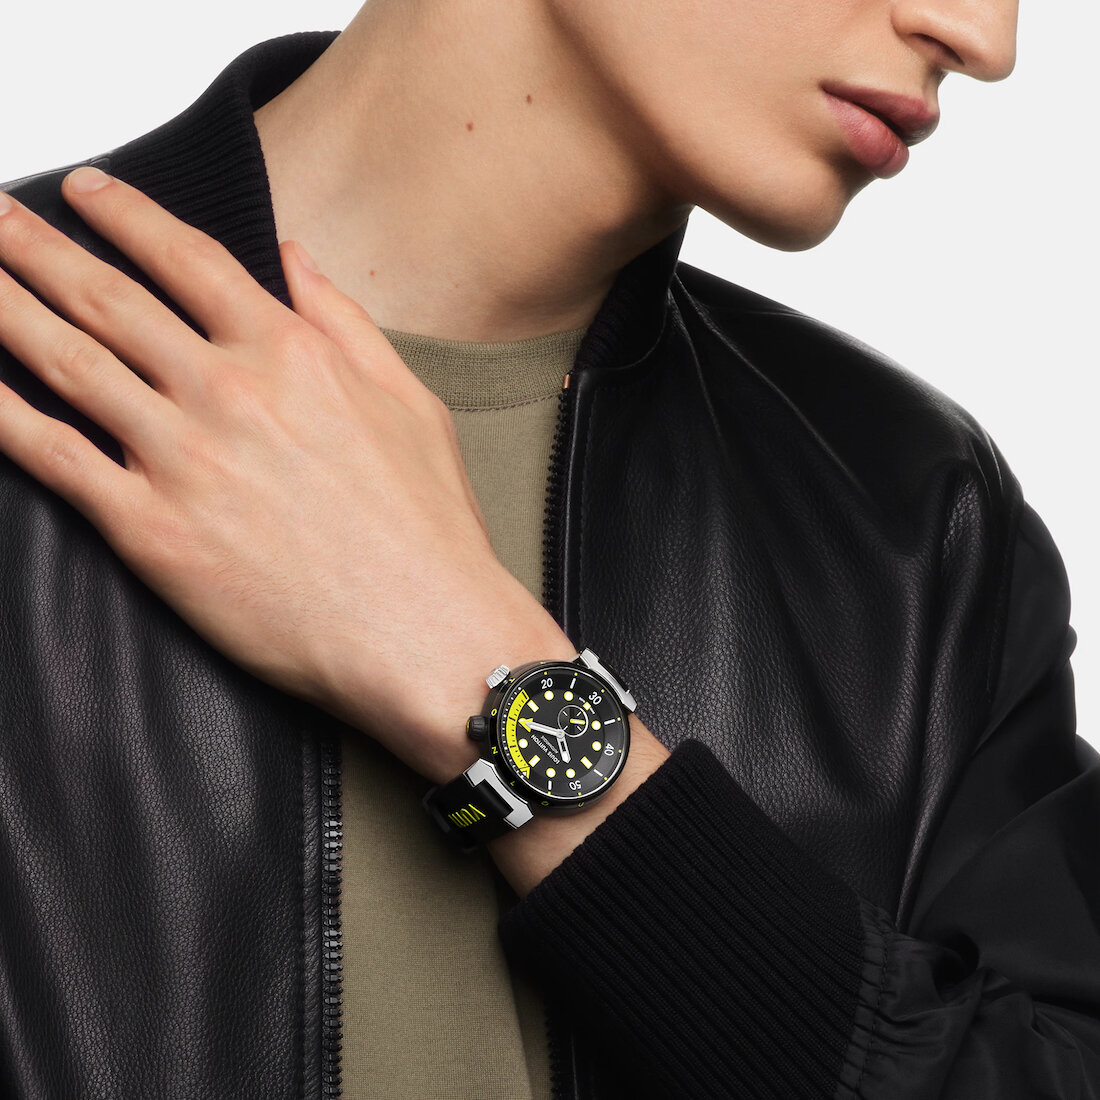 W&W 2021: Louis Vuitton Tambour Street Diver. Four Colorful Models to  Please Everyone's Wrist. — WATCH COLLECTING LIFESTYLE